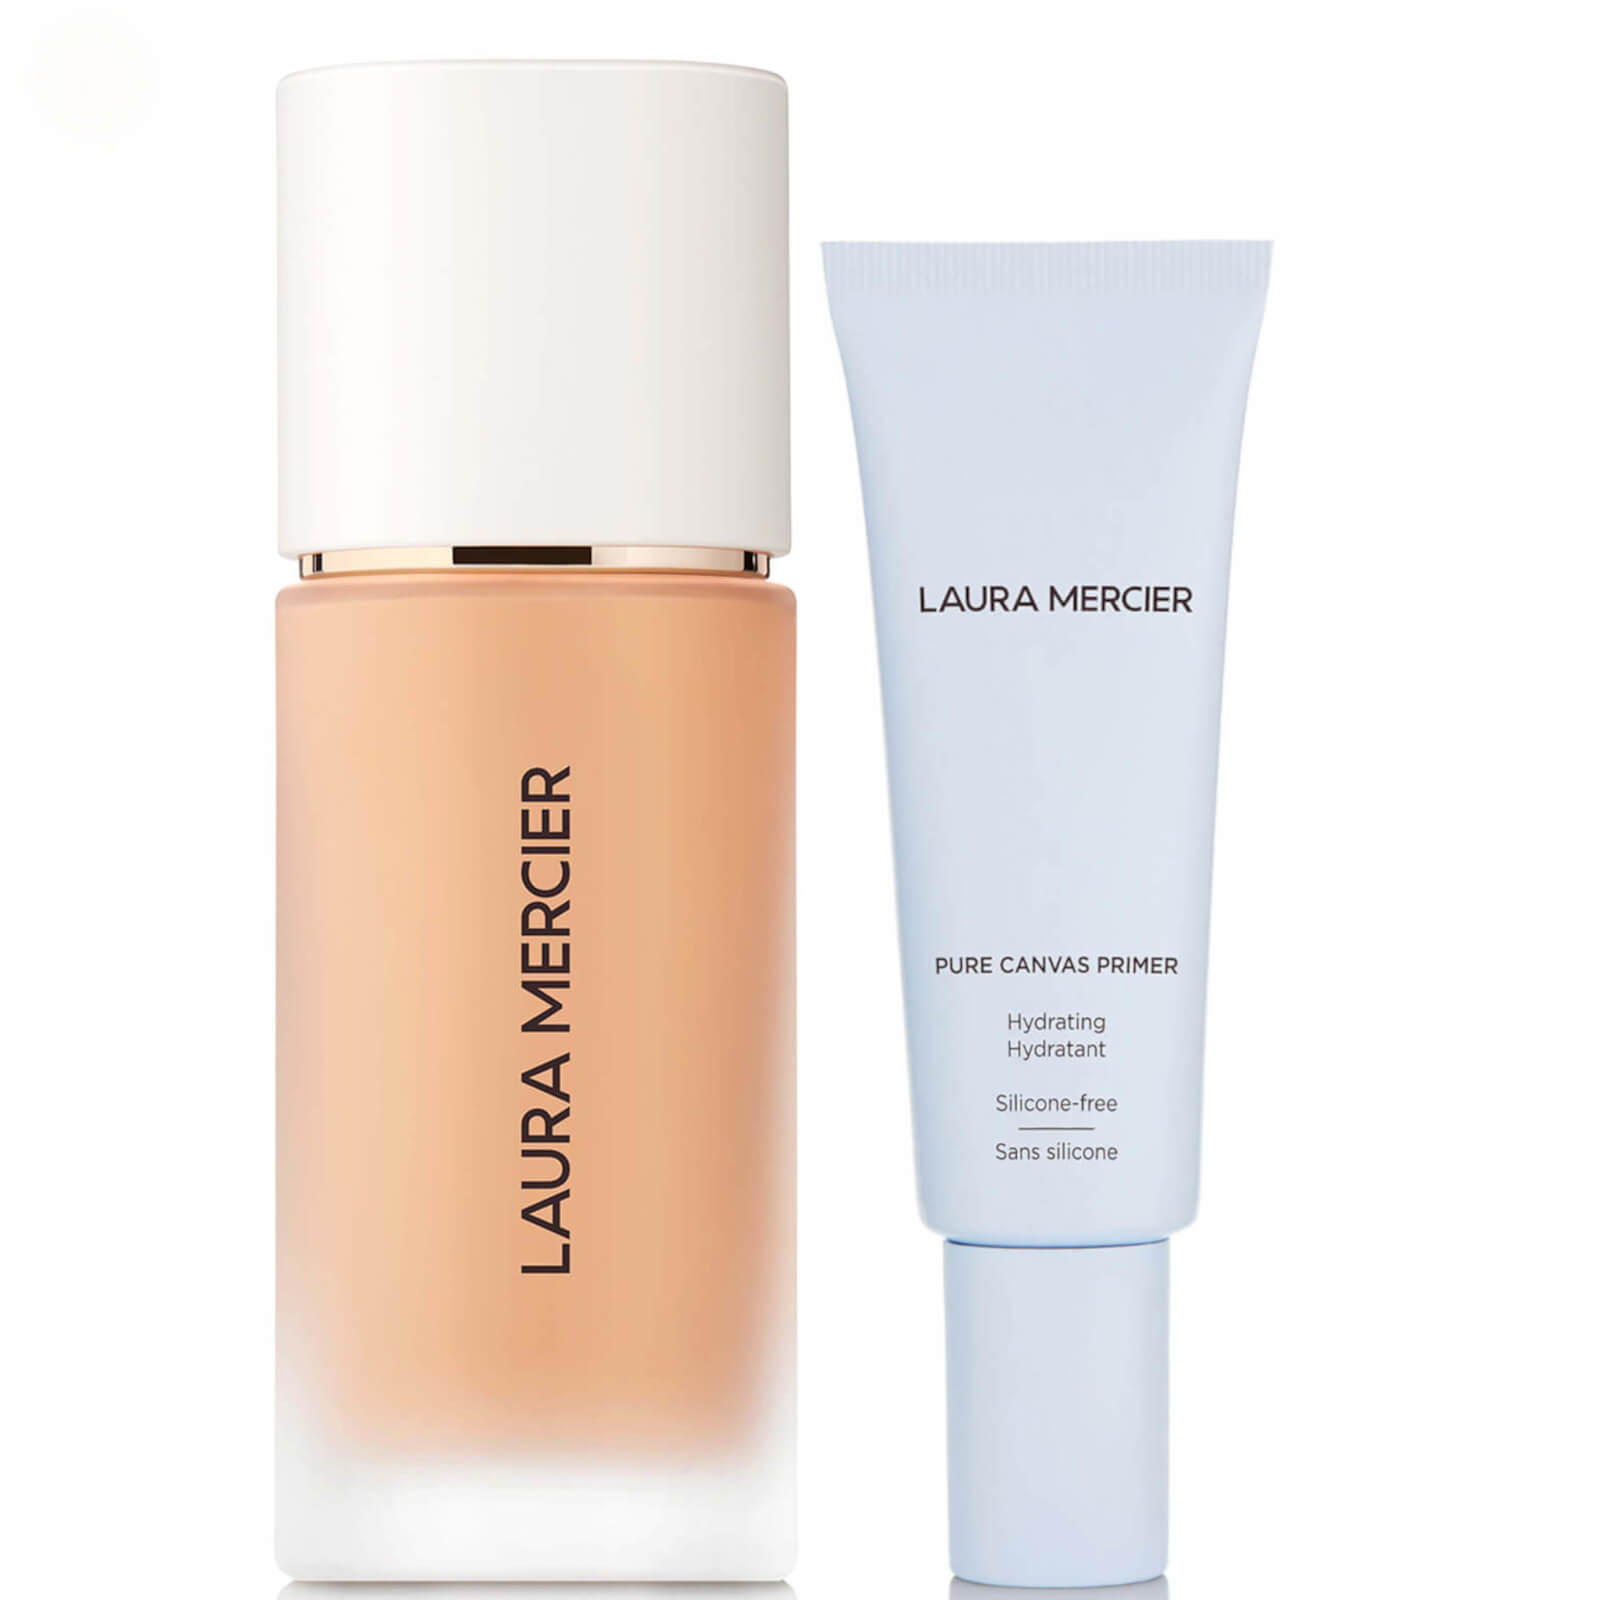 Laura Mercier Real Flawless Foundation and Pure Canvas Hydrating Primer Bundle (Various Shades) - 2N2 Linen